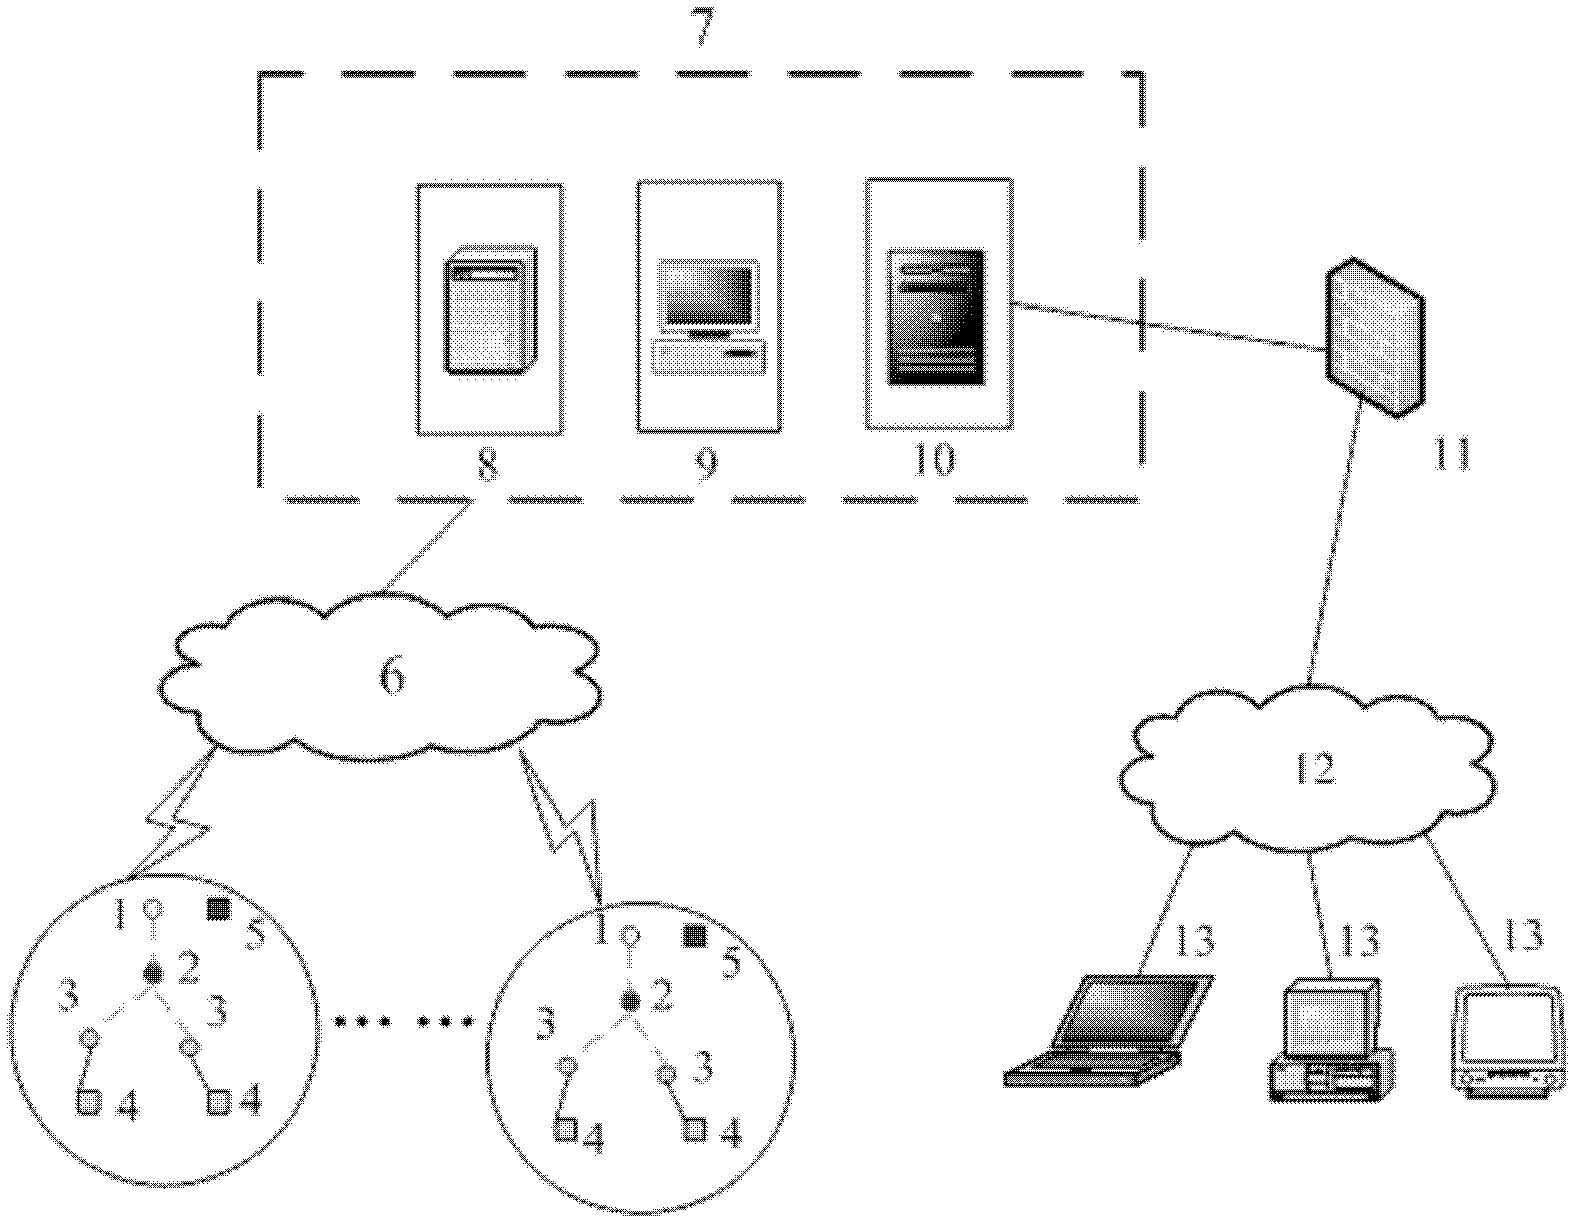 Digitized information system and method for remotely and comprehensively monitoring urban inspection wells